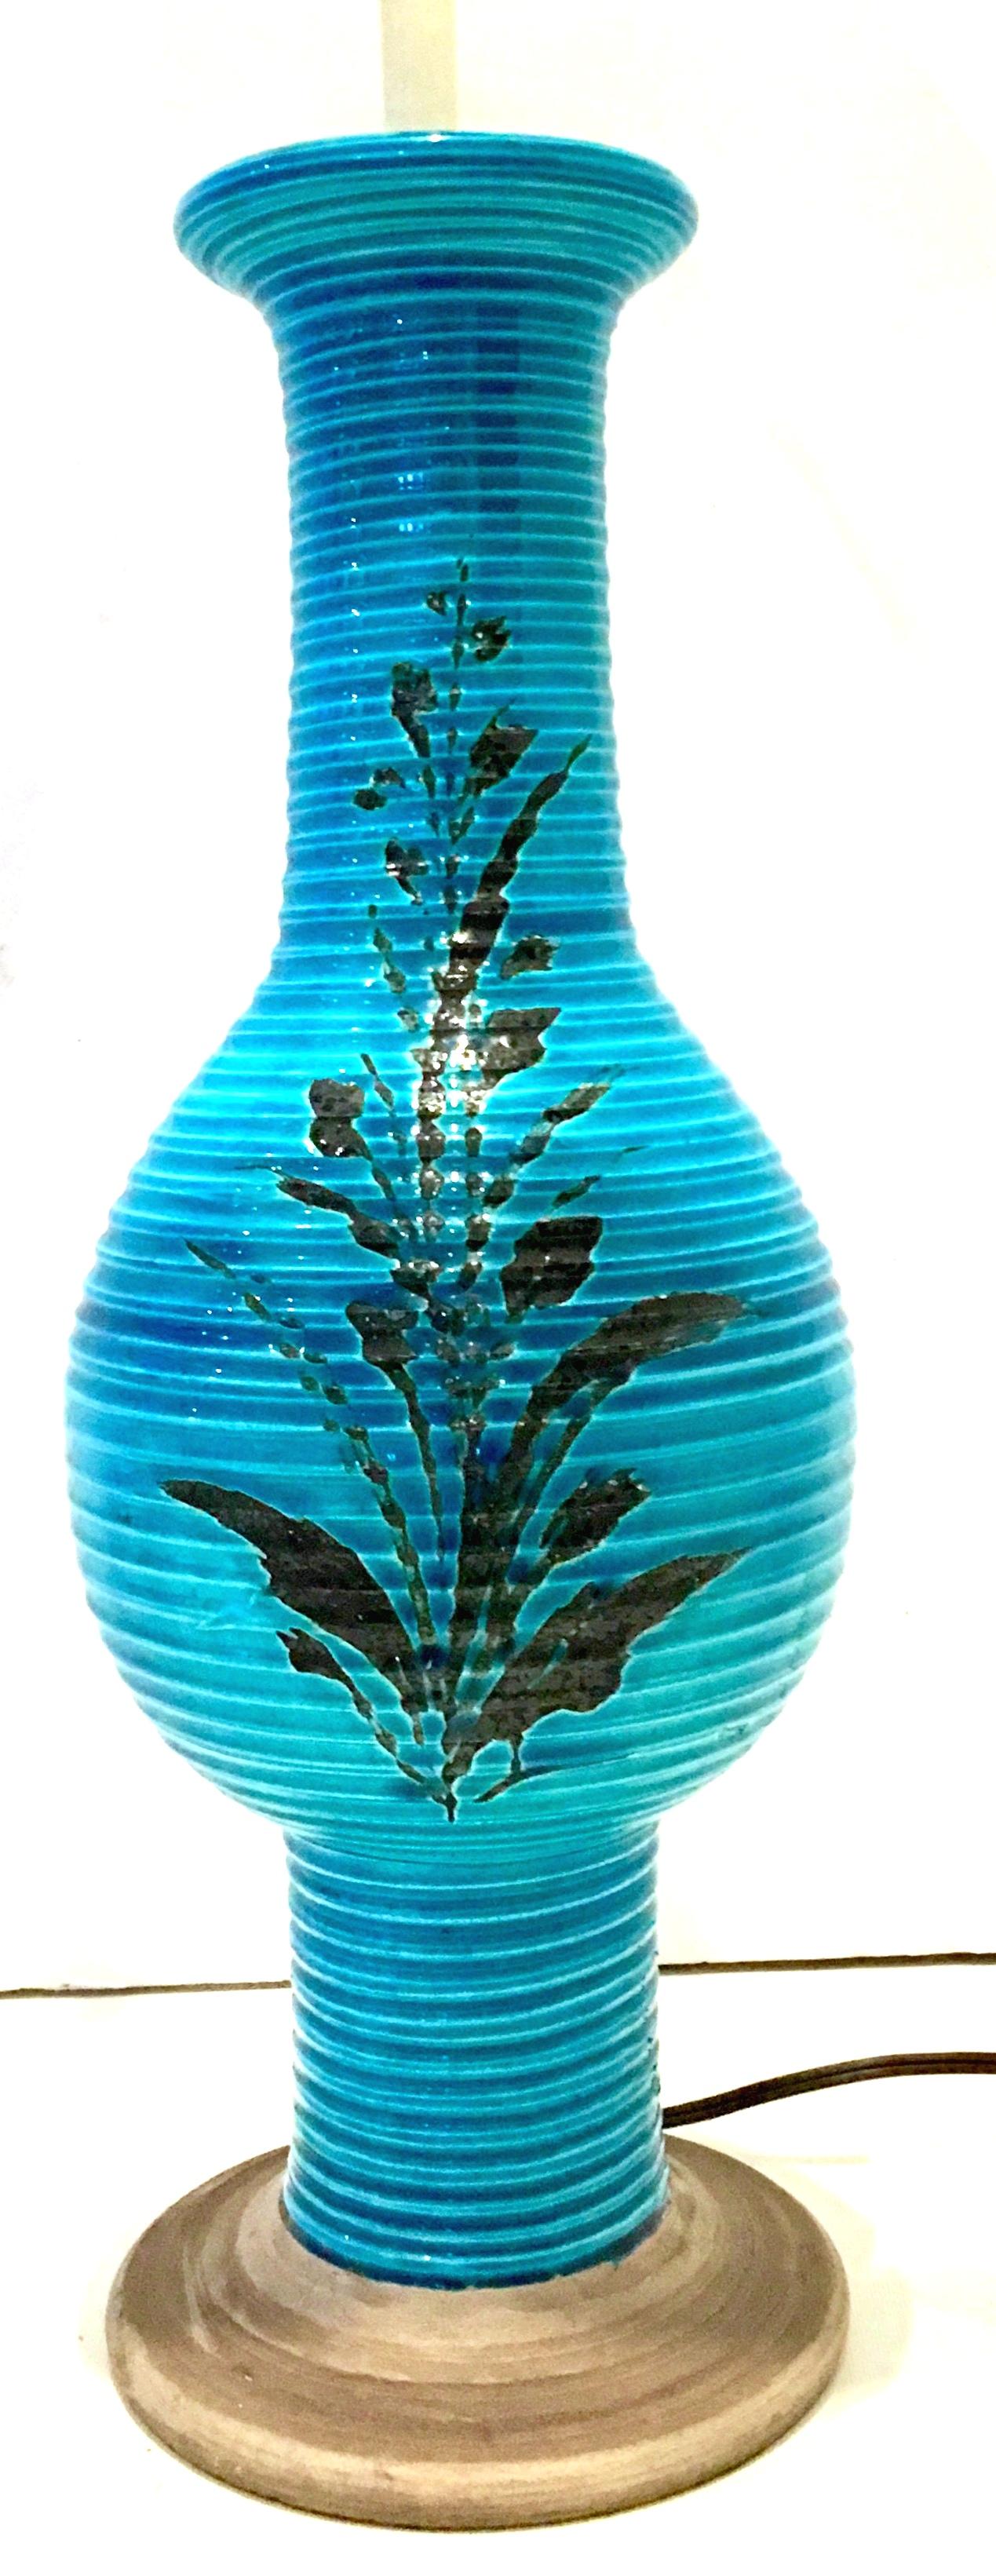 Hand-Painted 1960s Italian Cerulean Blue and Black Ceramic Glaze Pottery Lamp by, Bitossi For Sale